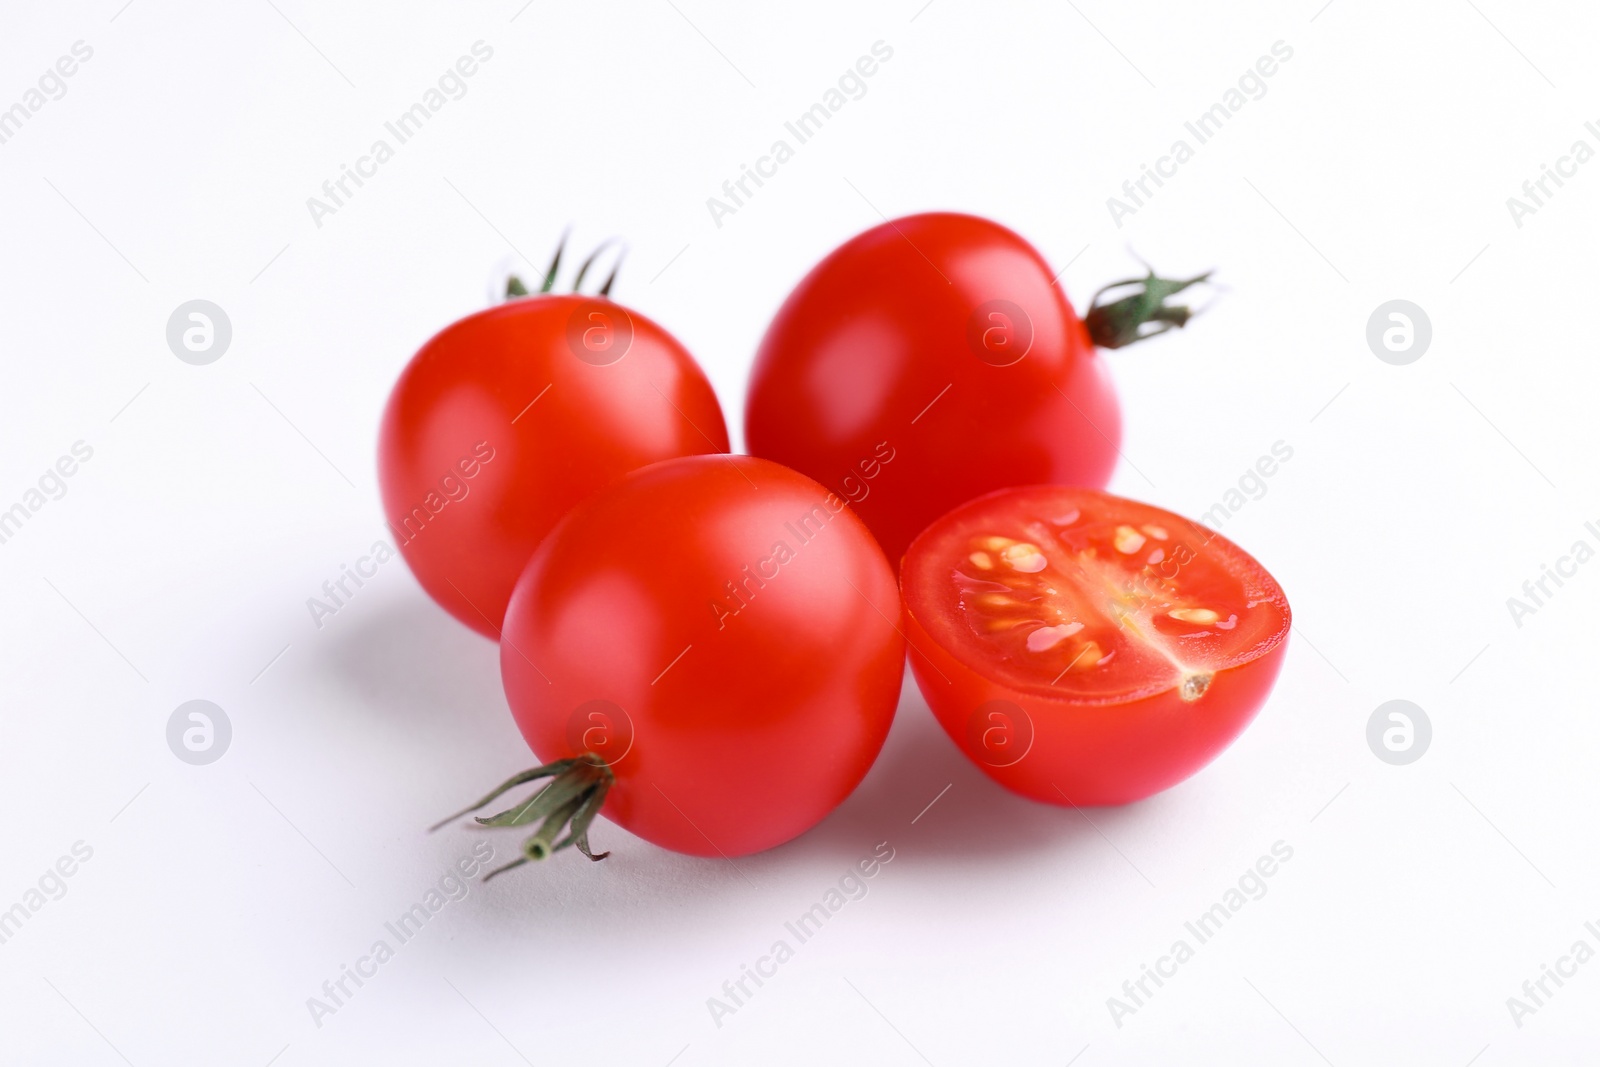 Photo of Whole and cut ripe tomatoes on white background